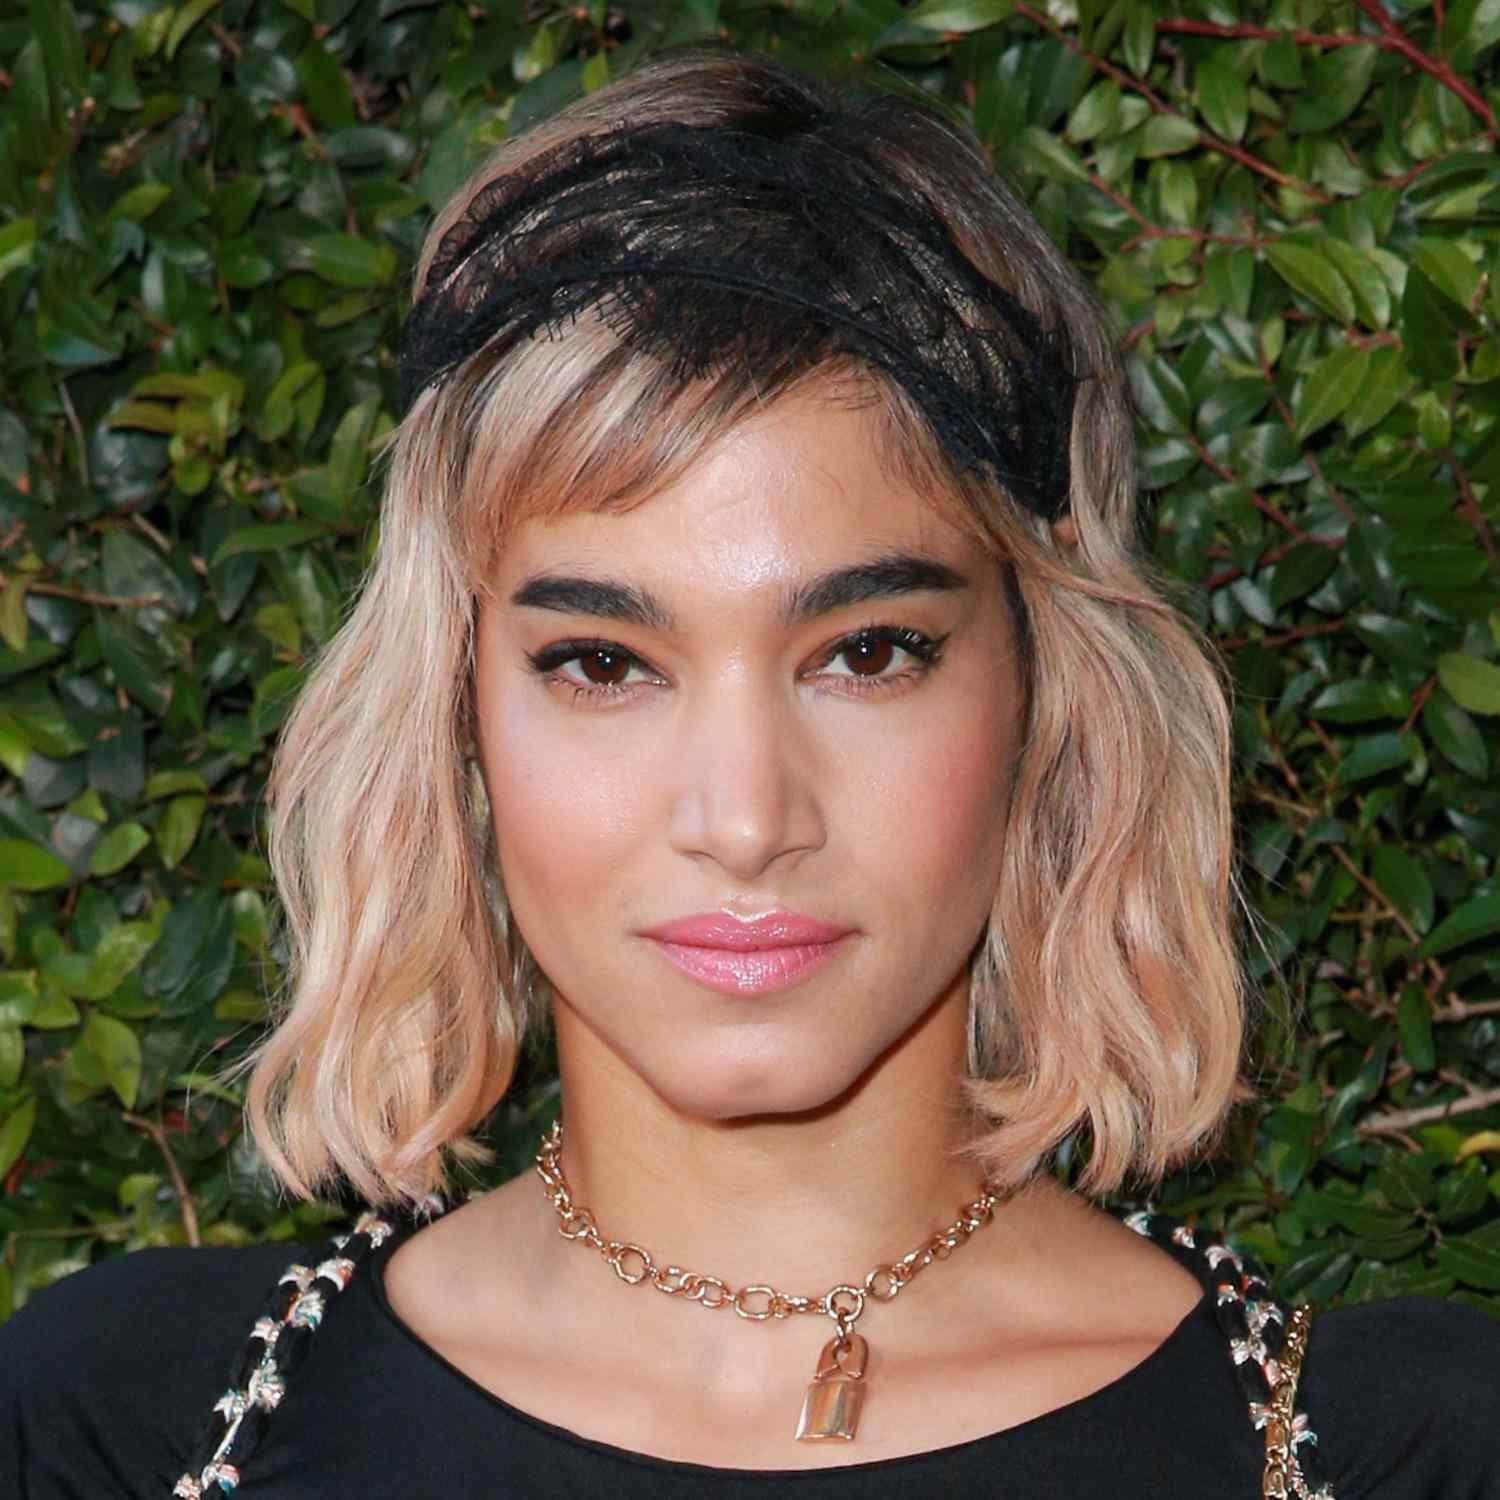 Sofia Boutella wears a wavy long bob hairstyle with side-swept baby bangs and black lace headband